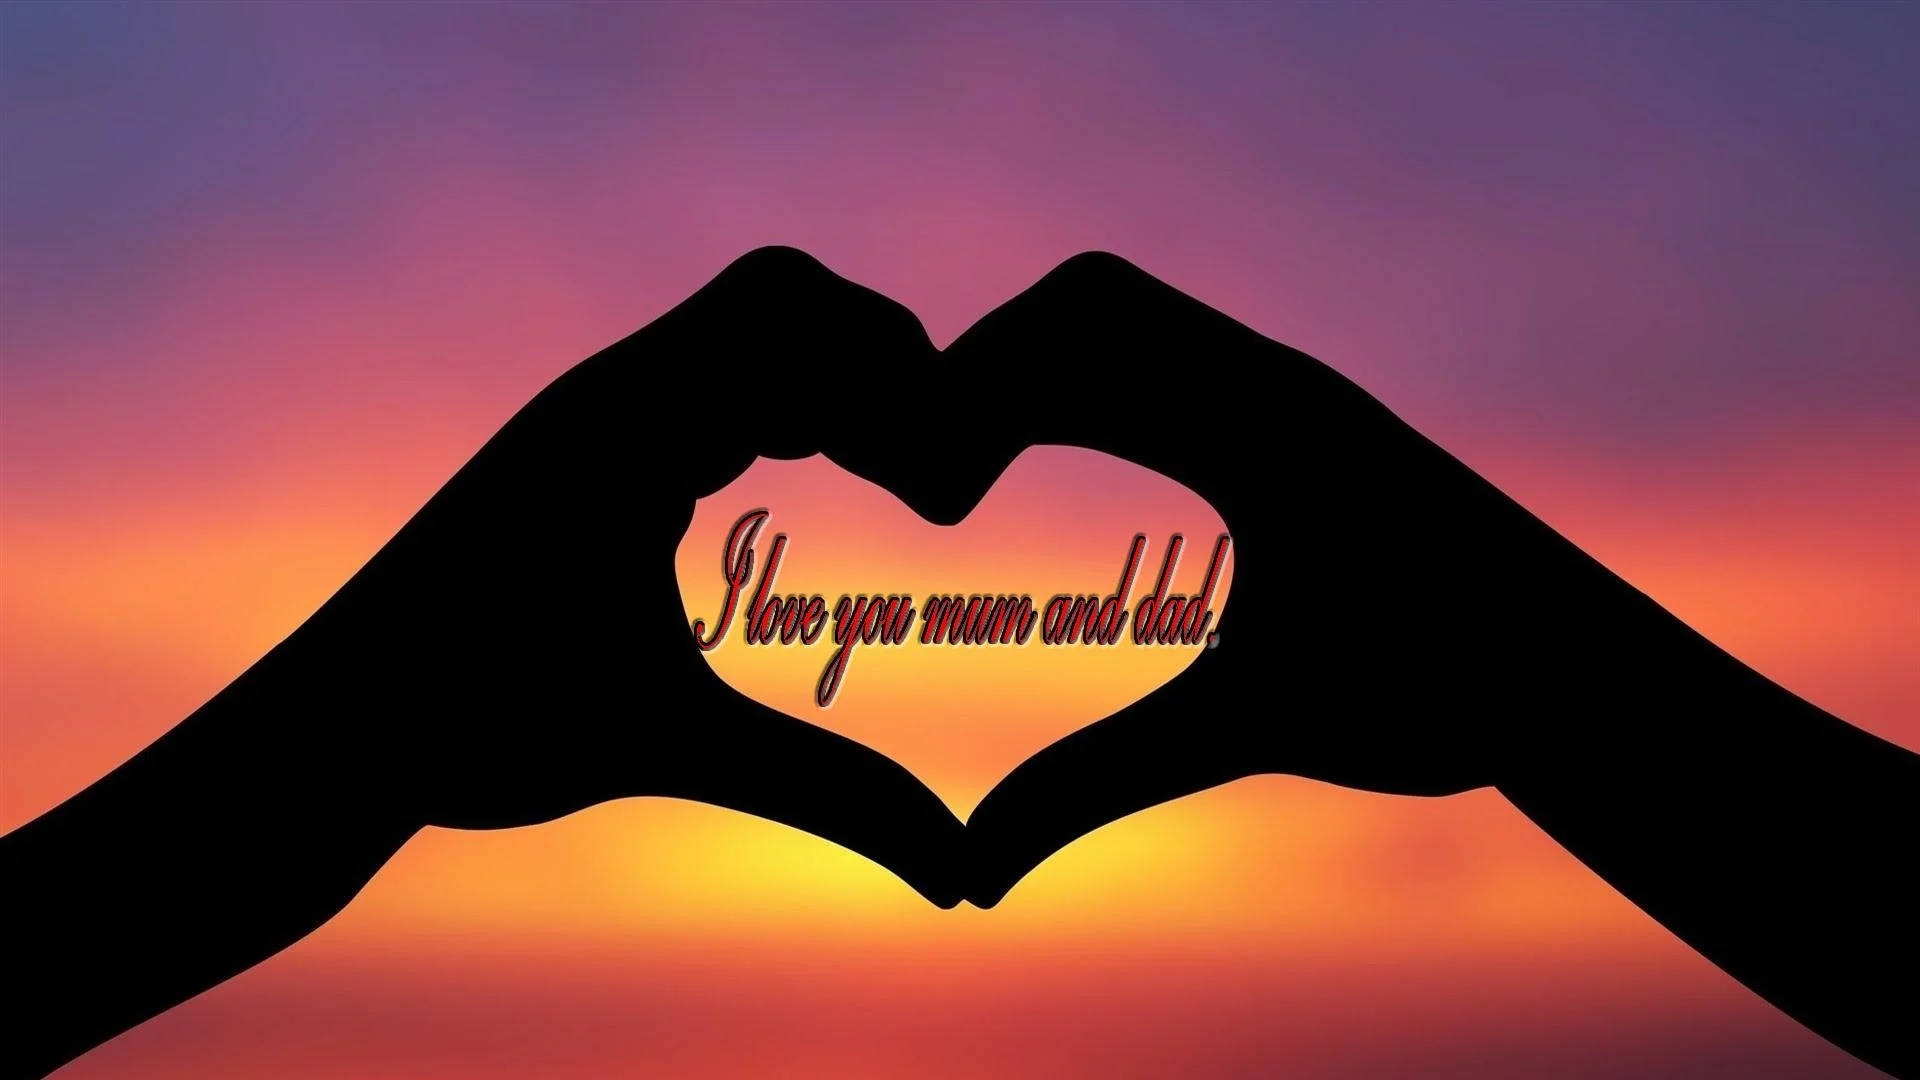 Mom And Dad Heart Hands Wallpaper